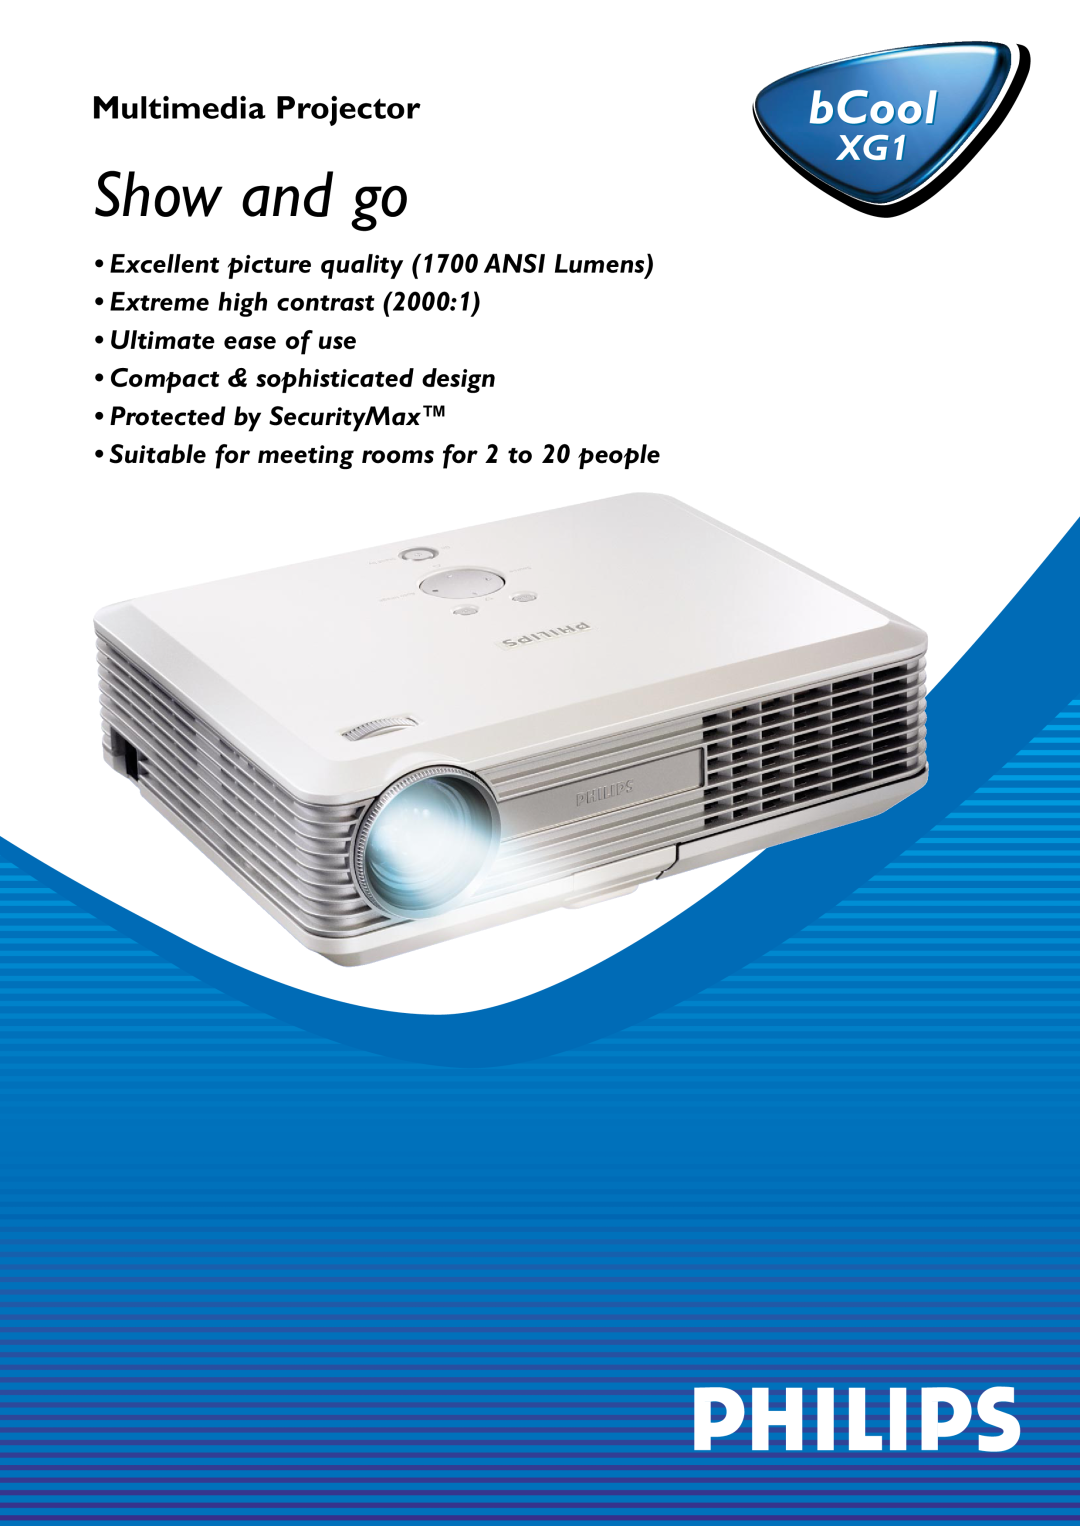 Philips XG1 manual Show and go, bCool, Multimedia Projector, Excellent picture quality 1700 ANSI Lumens 